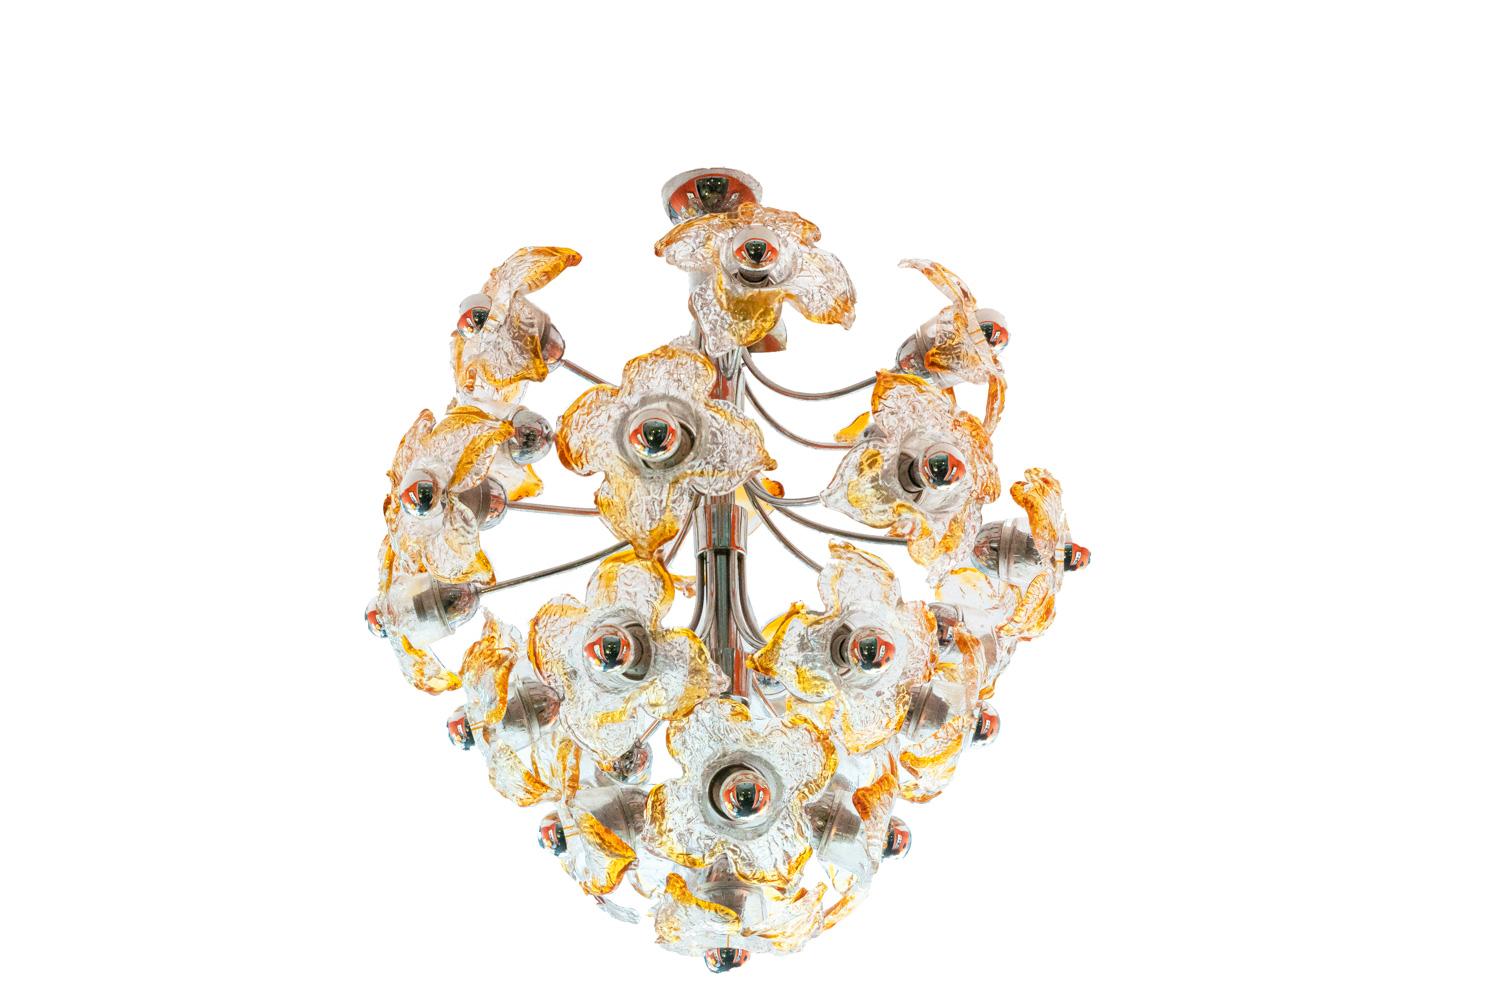 Mazzega, attributed to.
Chandelier in transparent and orange Murano glass decorated with flowers held by chromed metal rods.

Italian work realized in the 1950s.

New and functional electrical system.

The Mazzega glass manufacture was